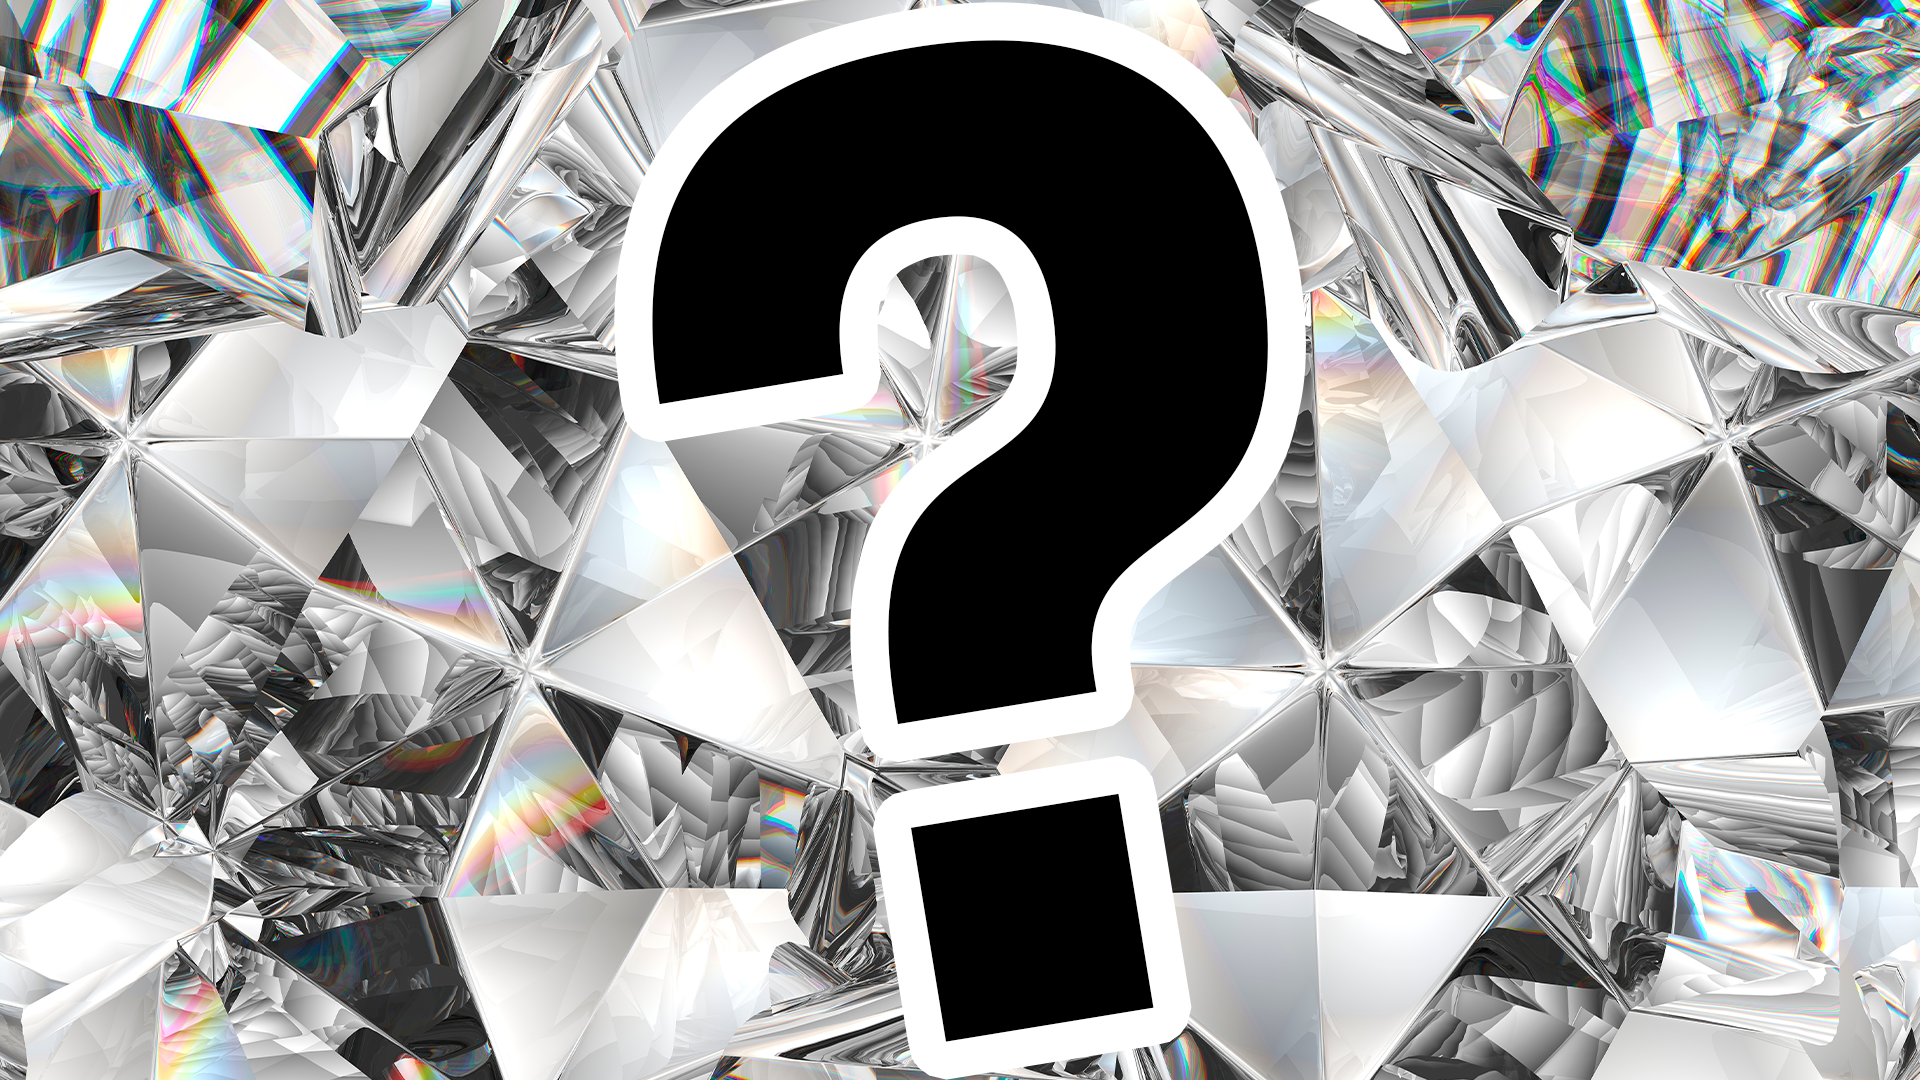 Diamond background with question mark